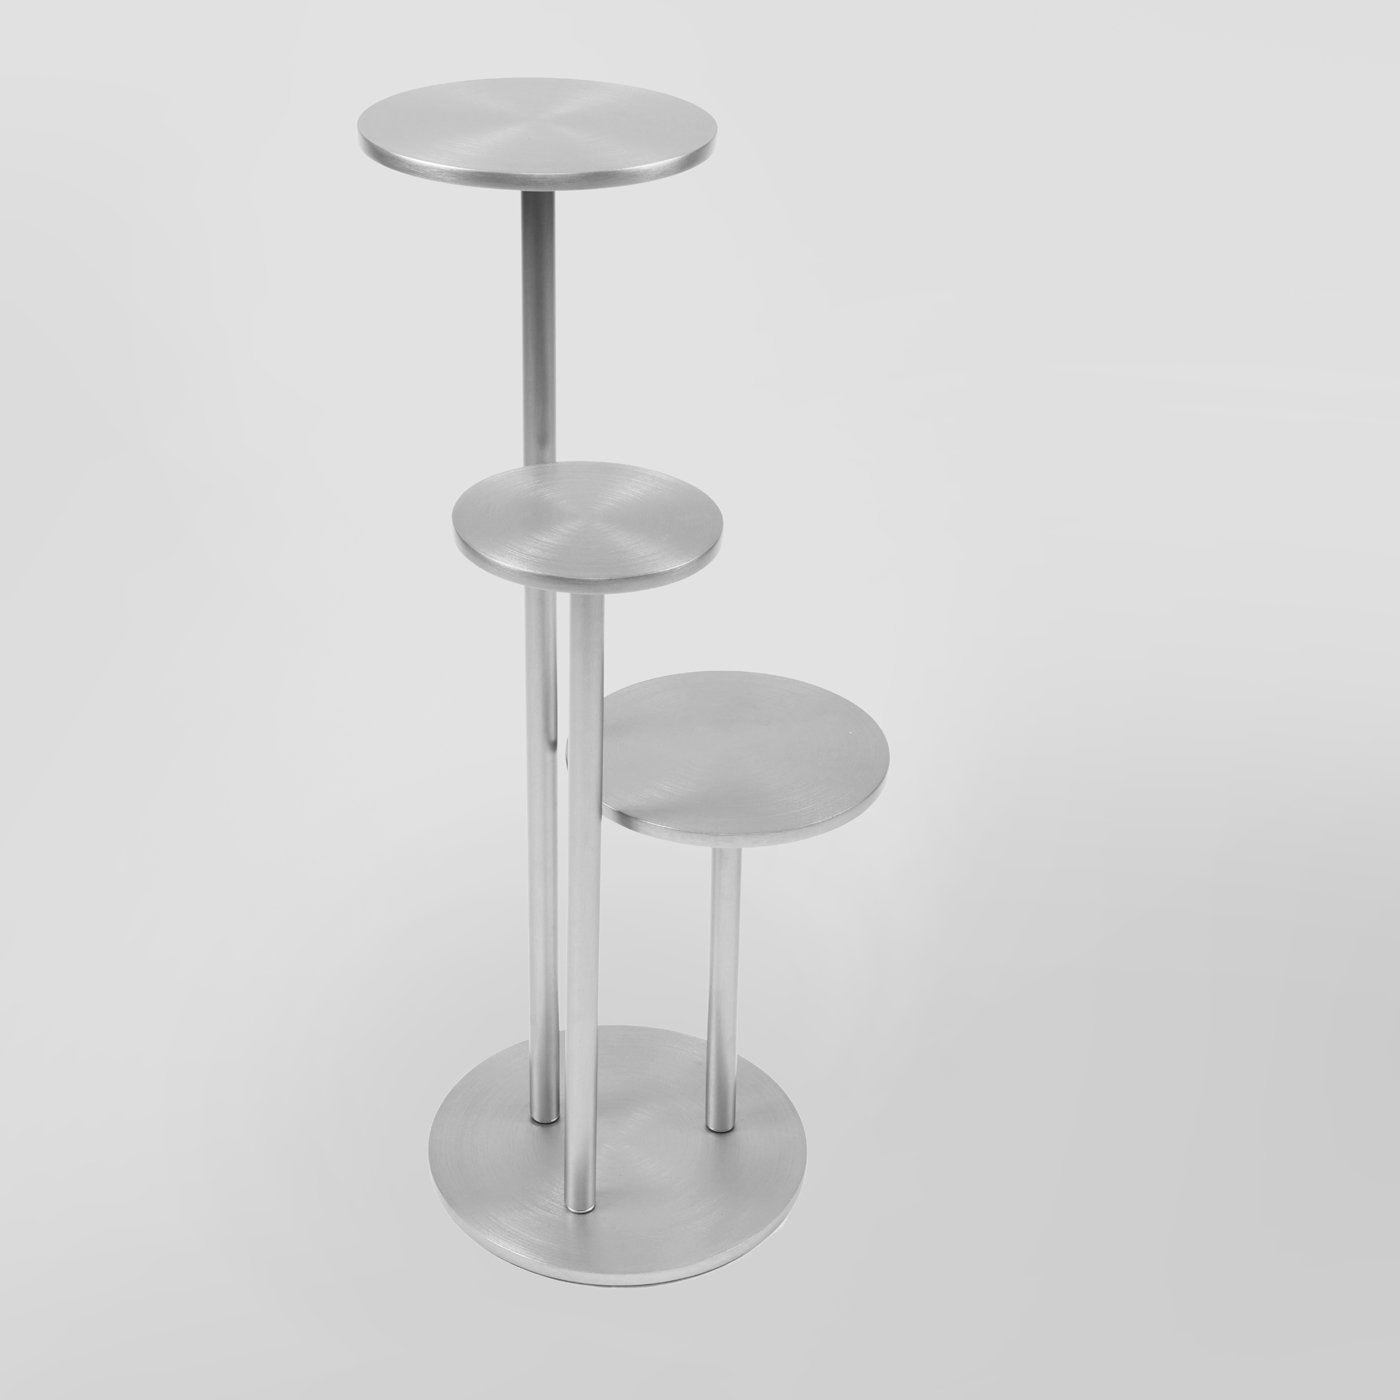 Orion Side Table in Aluminium - Alternative view 1